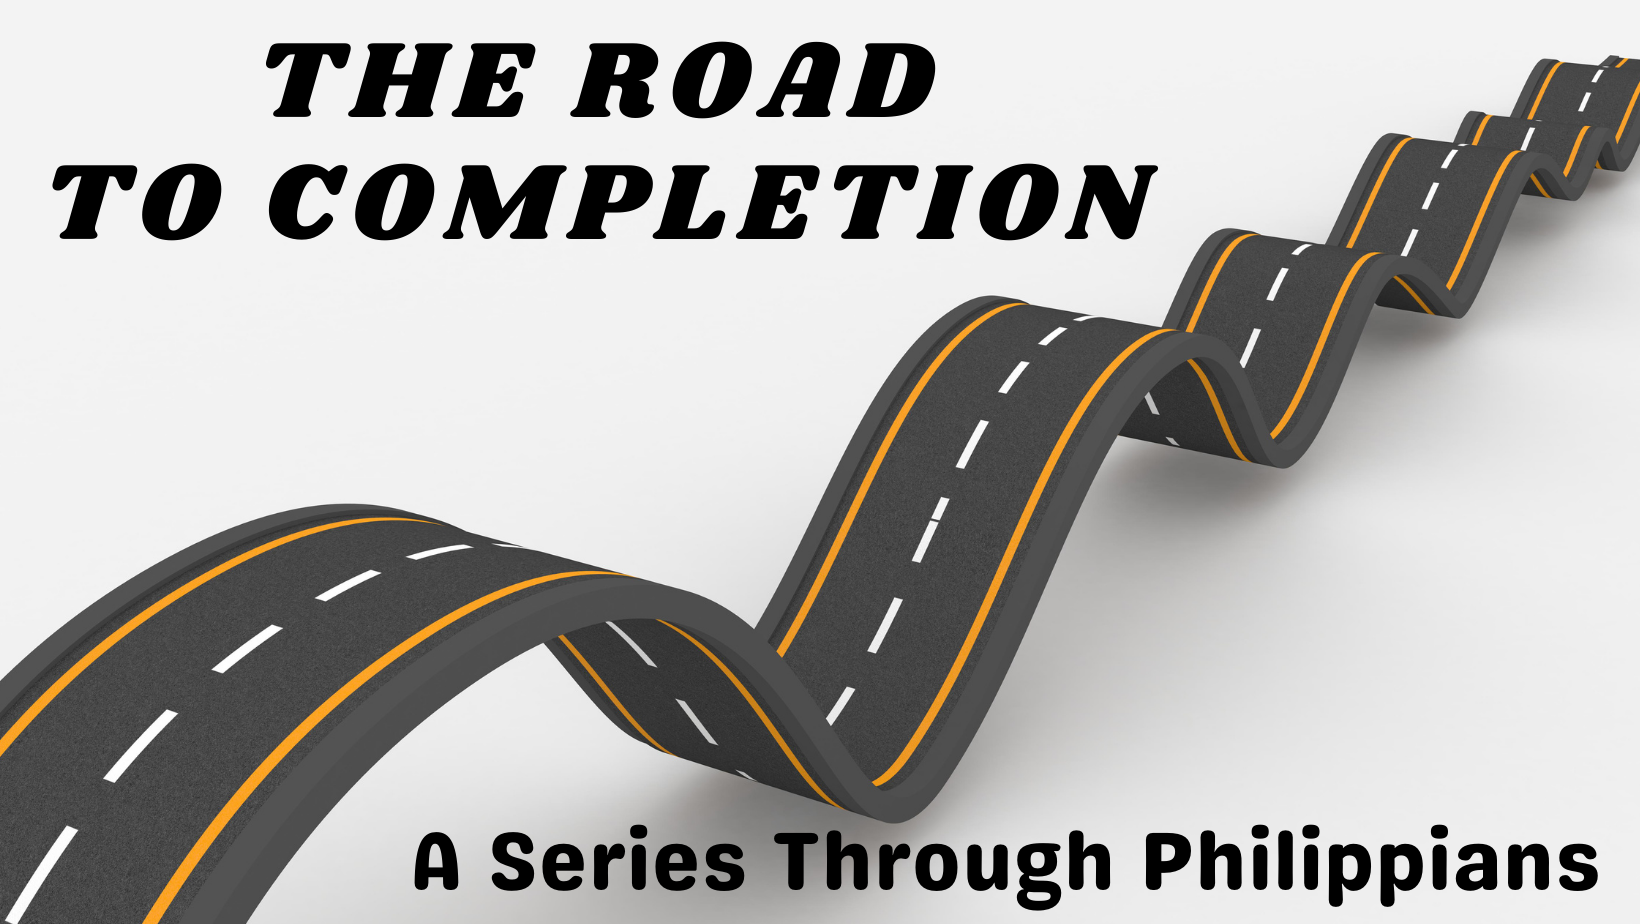 The Road to Completion